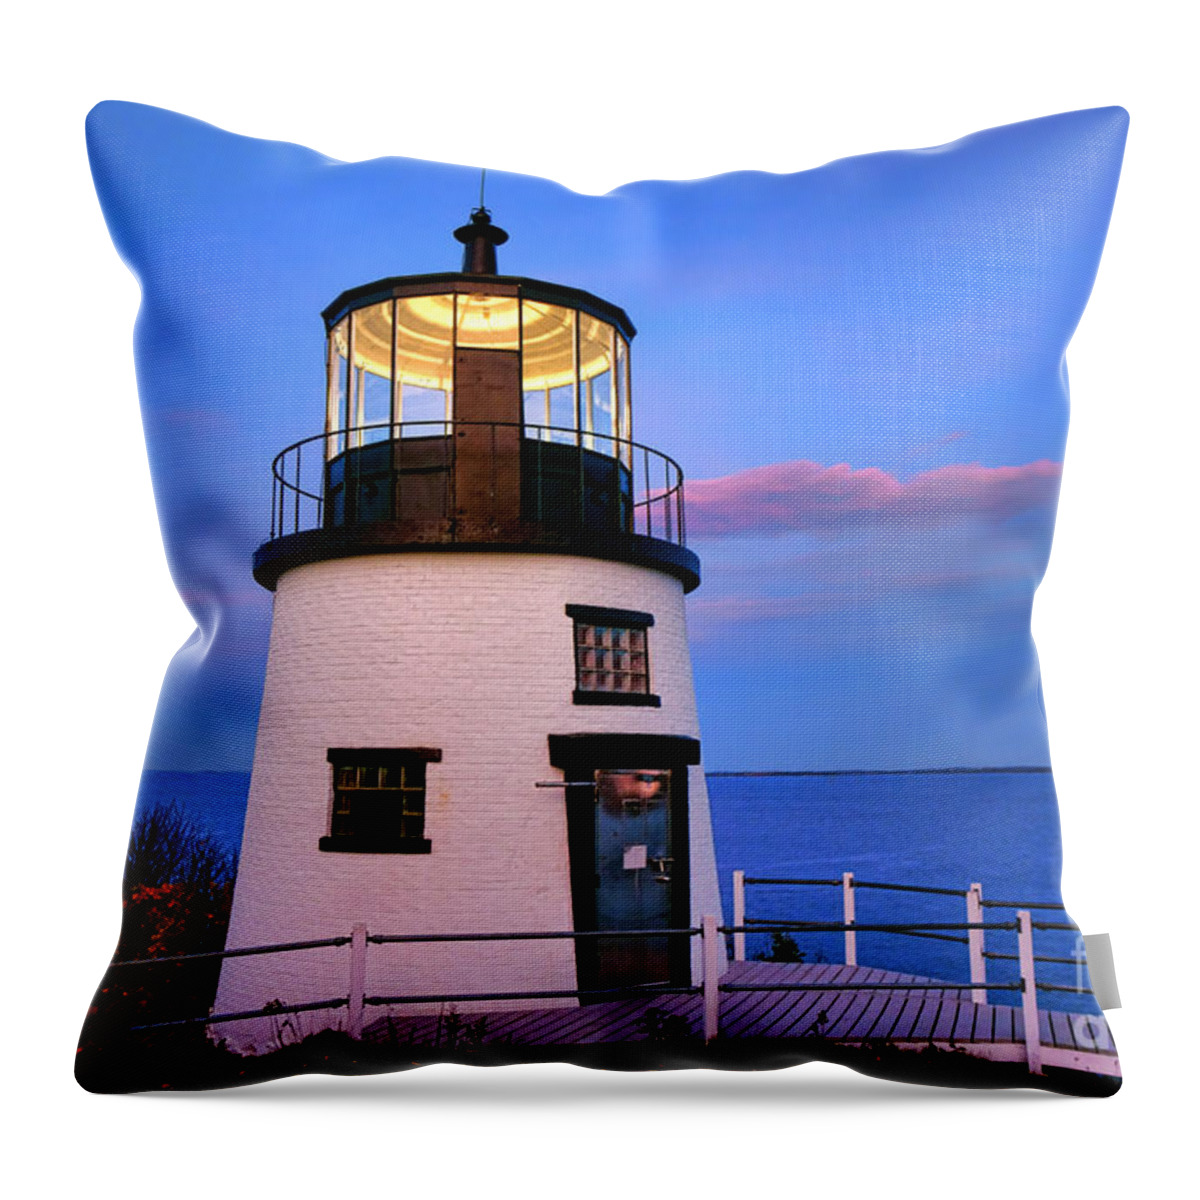 Owls Throw Pillow featuring the photograph Owls Head Light Evening by Olivier Le Queinec